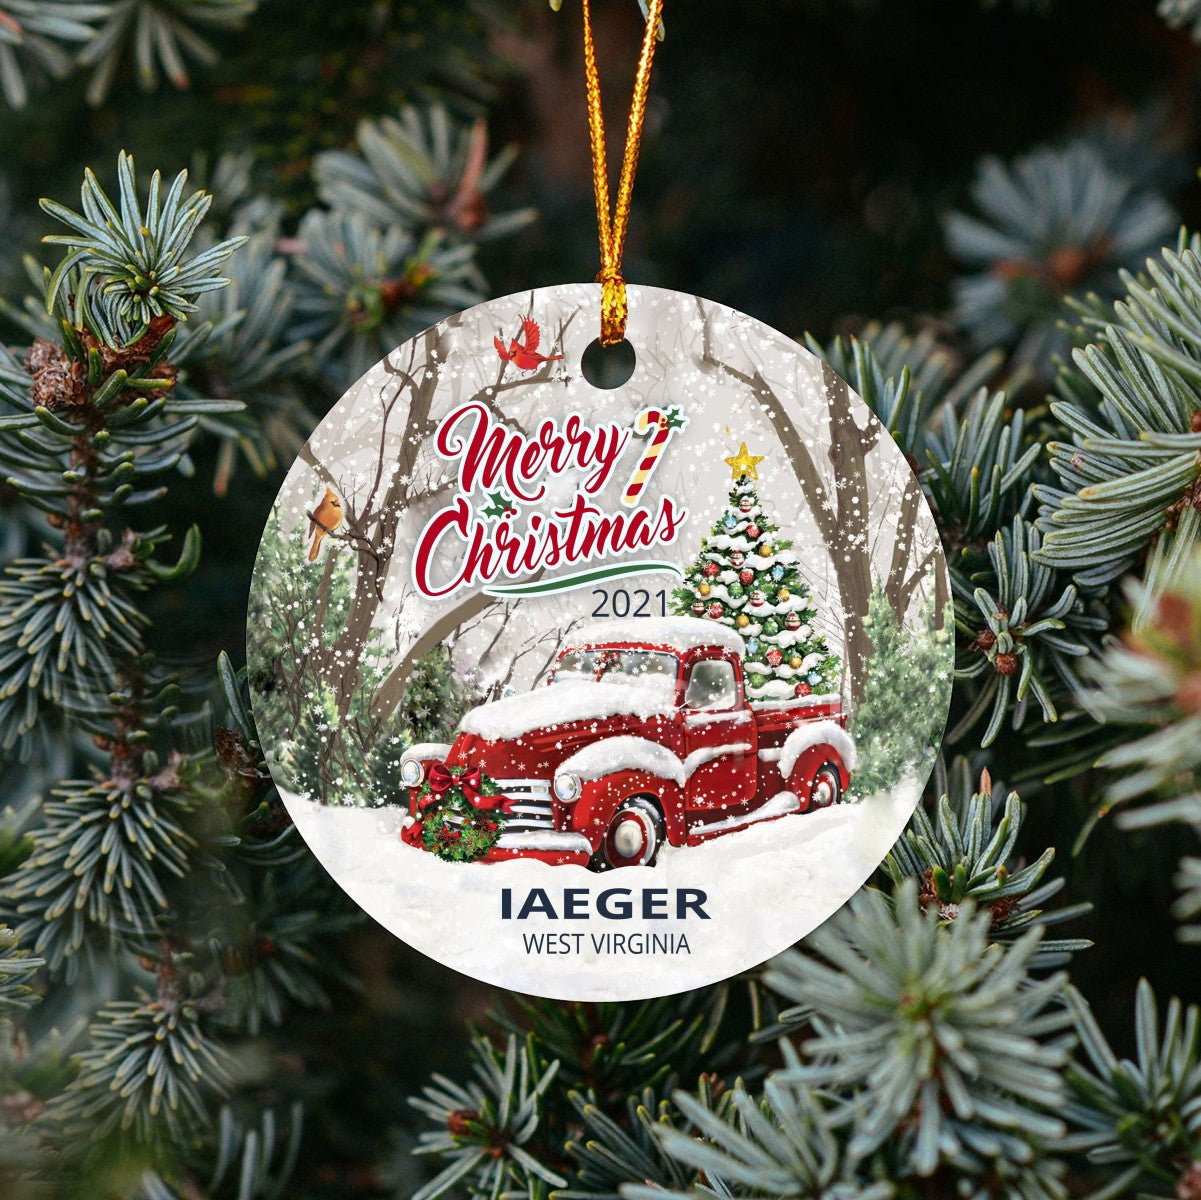 Christmas Tree Ornaments Iaeger - Ornament Customize With Name City And State Iaeger West Virginia WV - Red Truck Xmas Ornaments 3'' Plastic Gift For Family, Friend And Housewarming